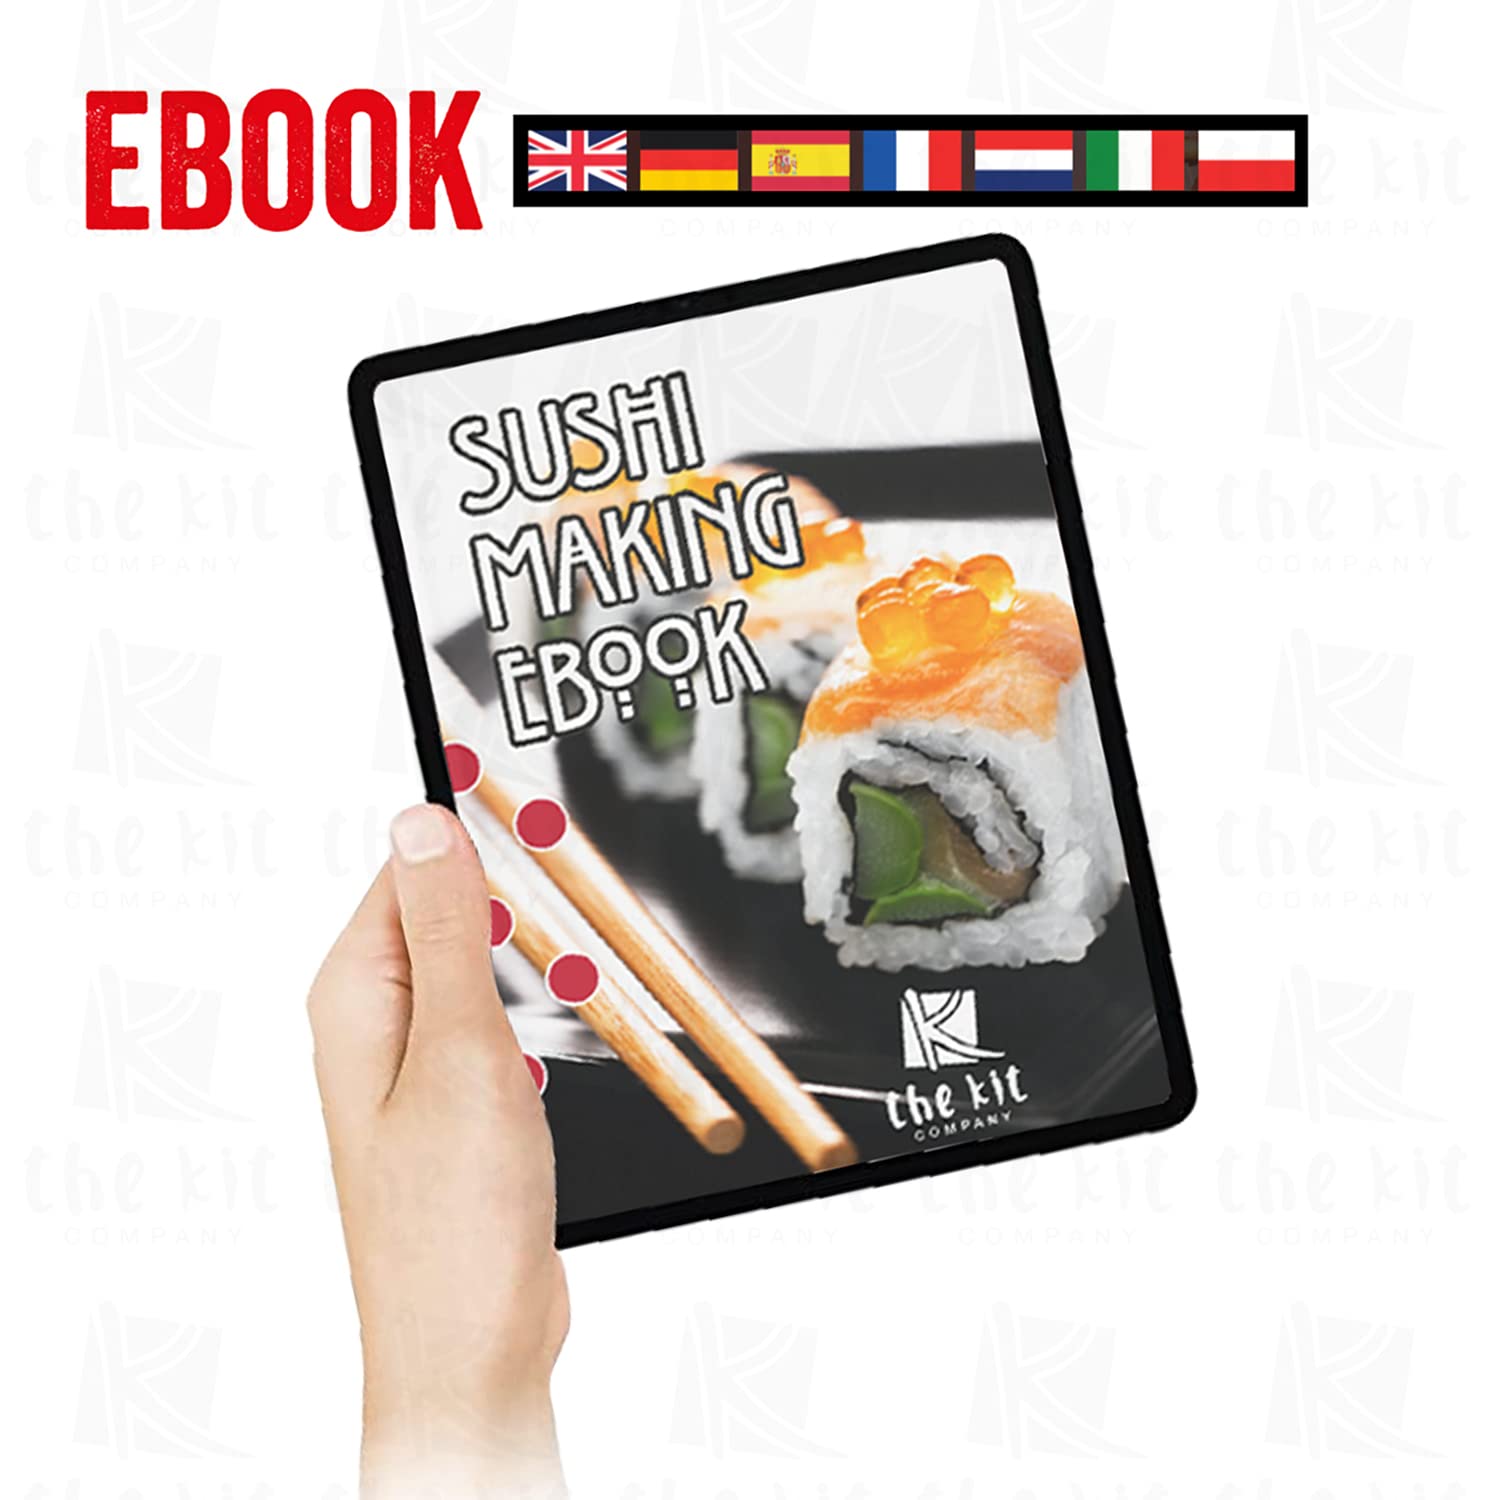 ELEDUCTMON Sushi Making Kit for Beginners - Original Sushi  Maker Deluxe Exclusive Online Video Tutorials Complete with Sushi Knife 11  Piece DIY Sushi Set - Easy and Fun - Sushi